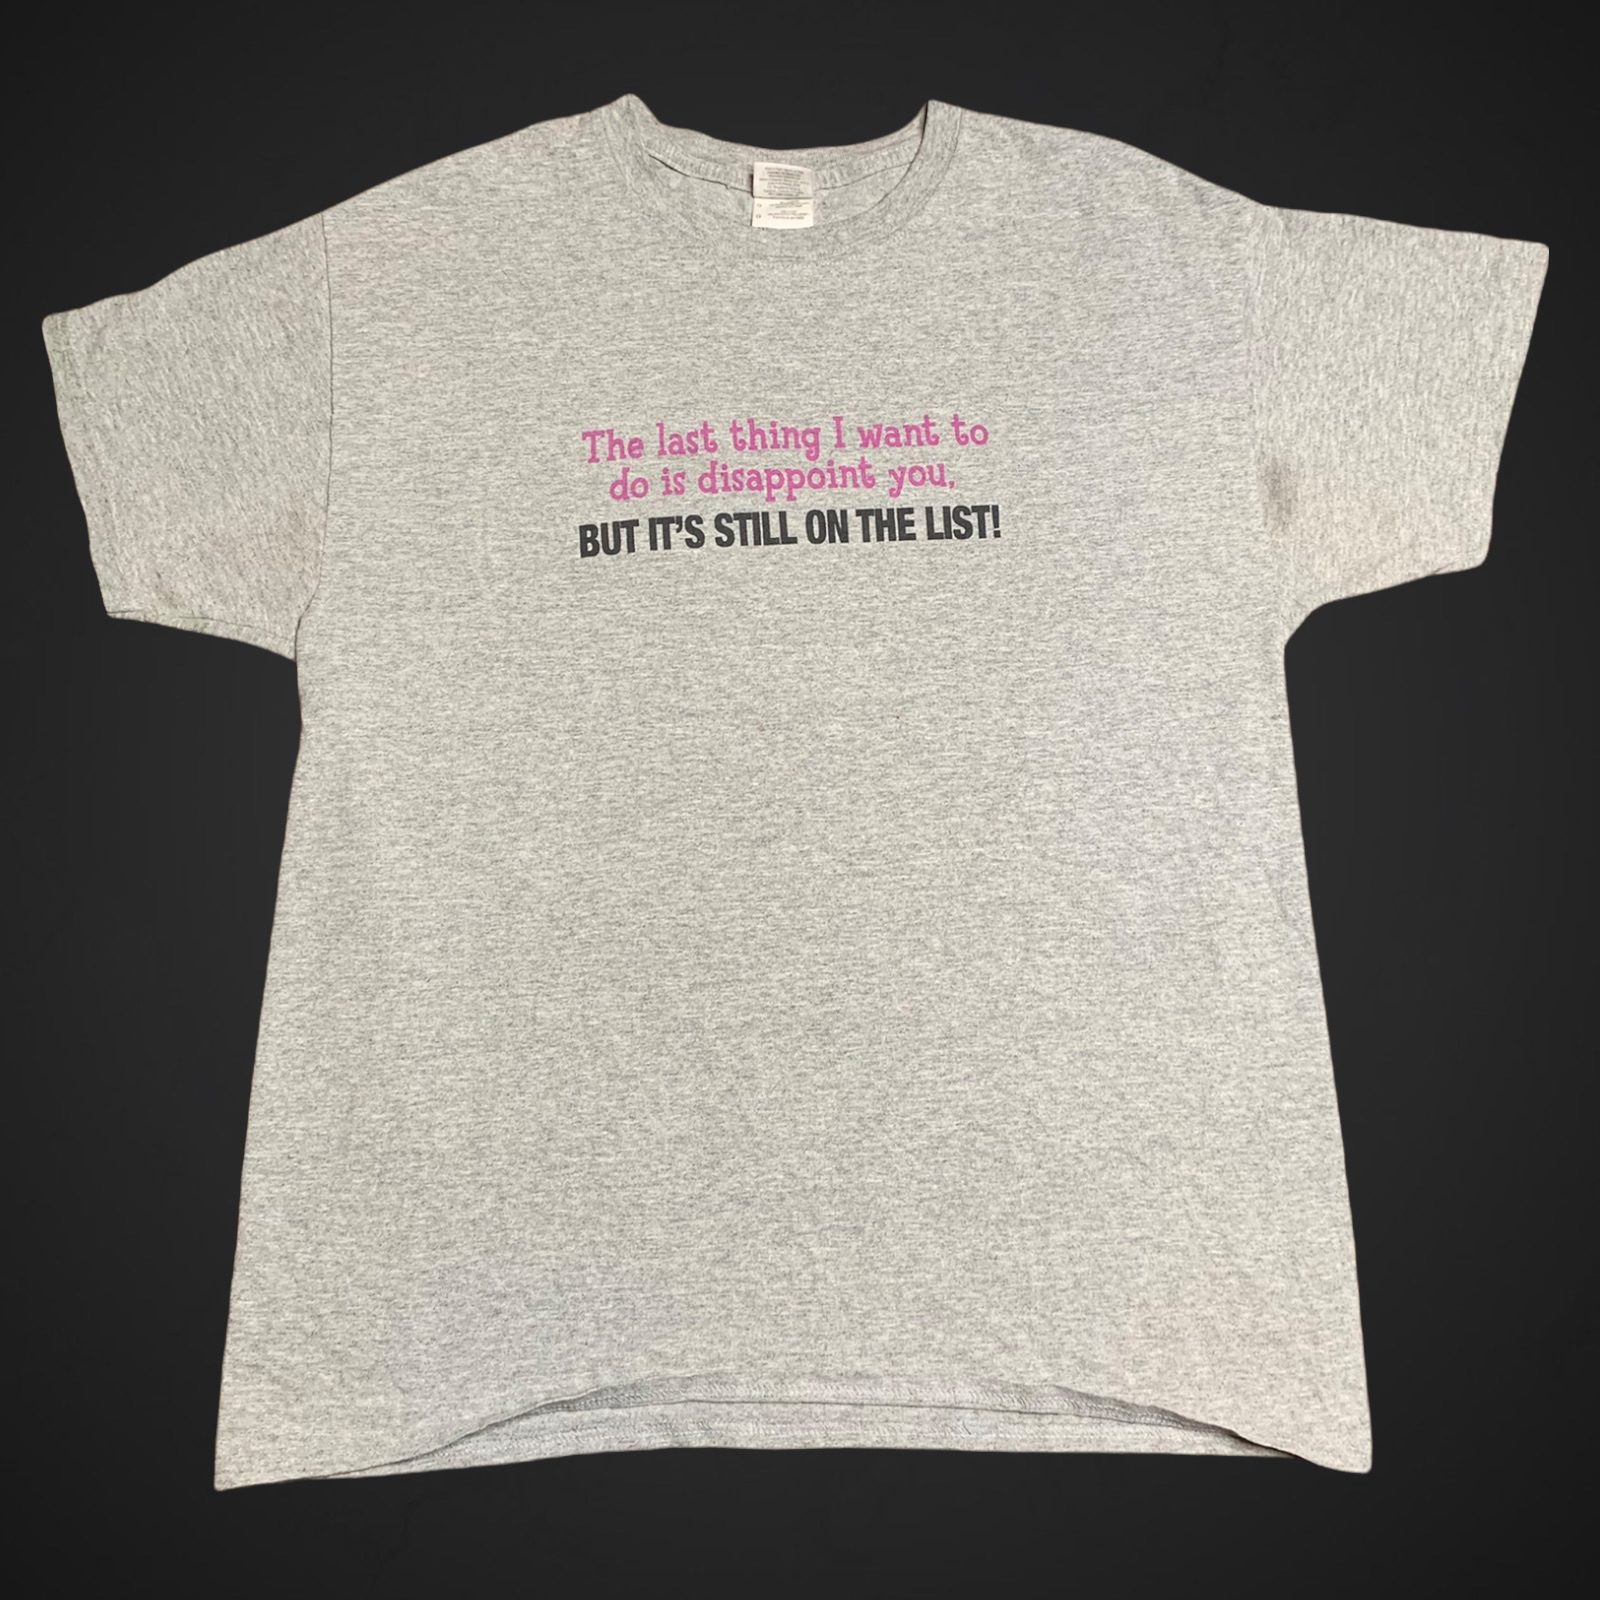 The Last Thing I Want To Do Is Disappoint You But It's Still On The List Men's T-Shirt Size L